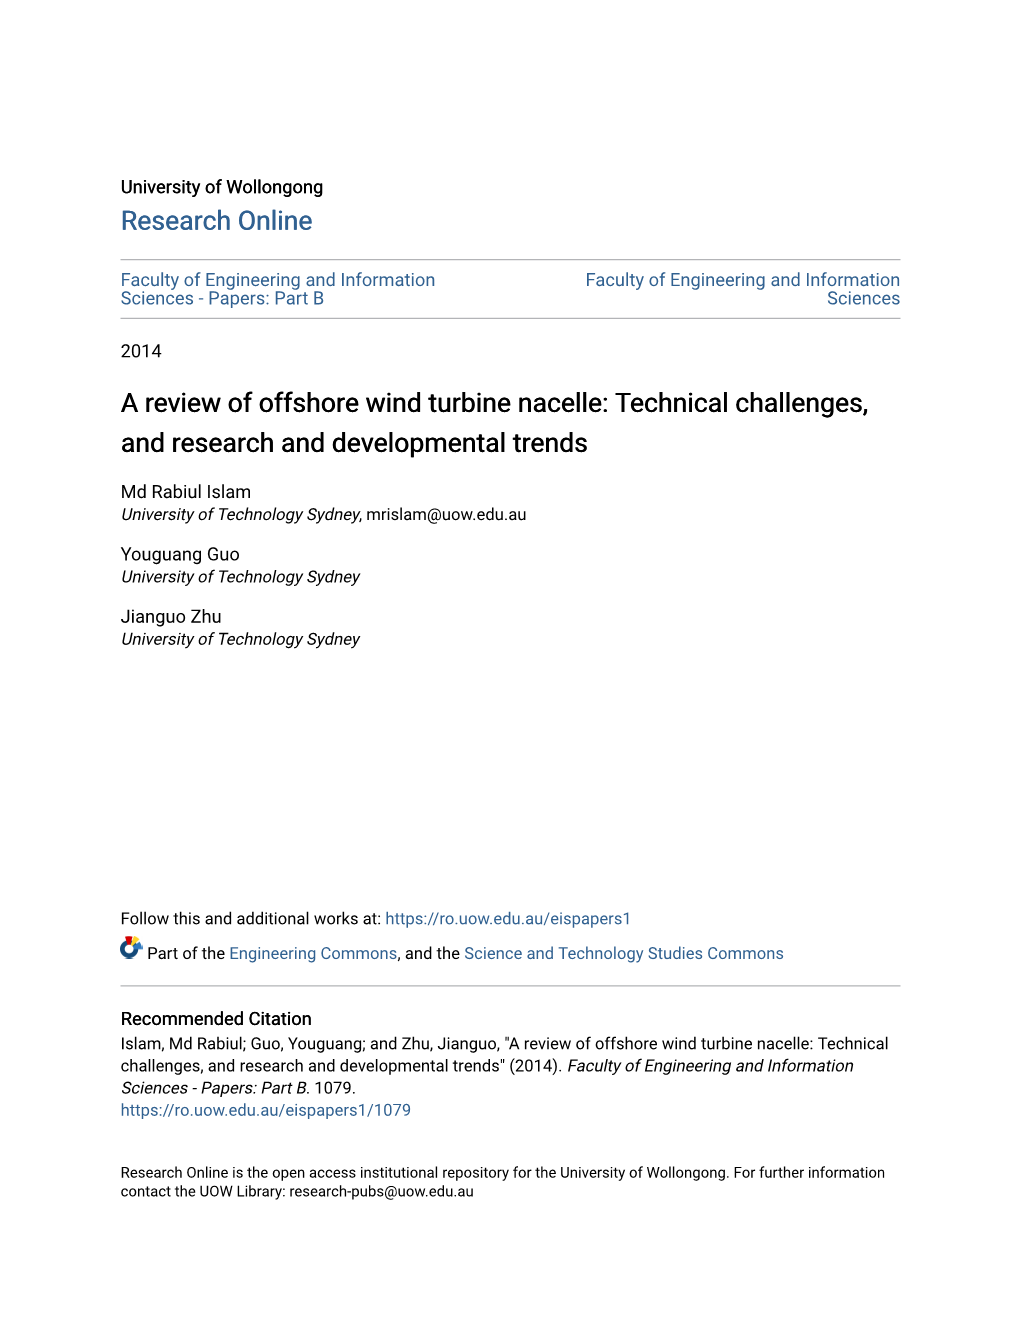 A Review of Offshore Wind Turbine Nacelle: Technical Challenges, and Research and Developmental Trends